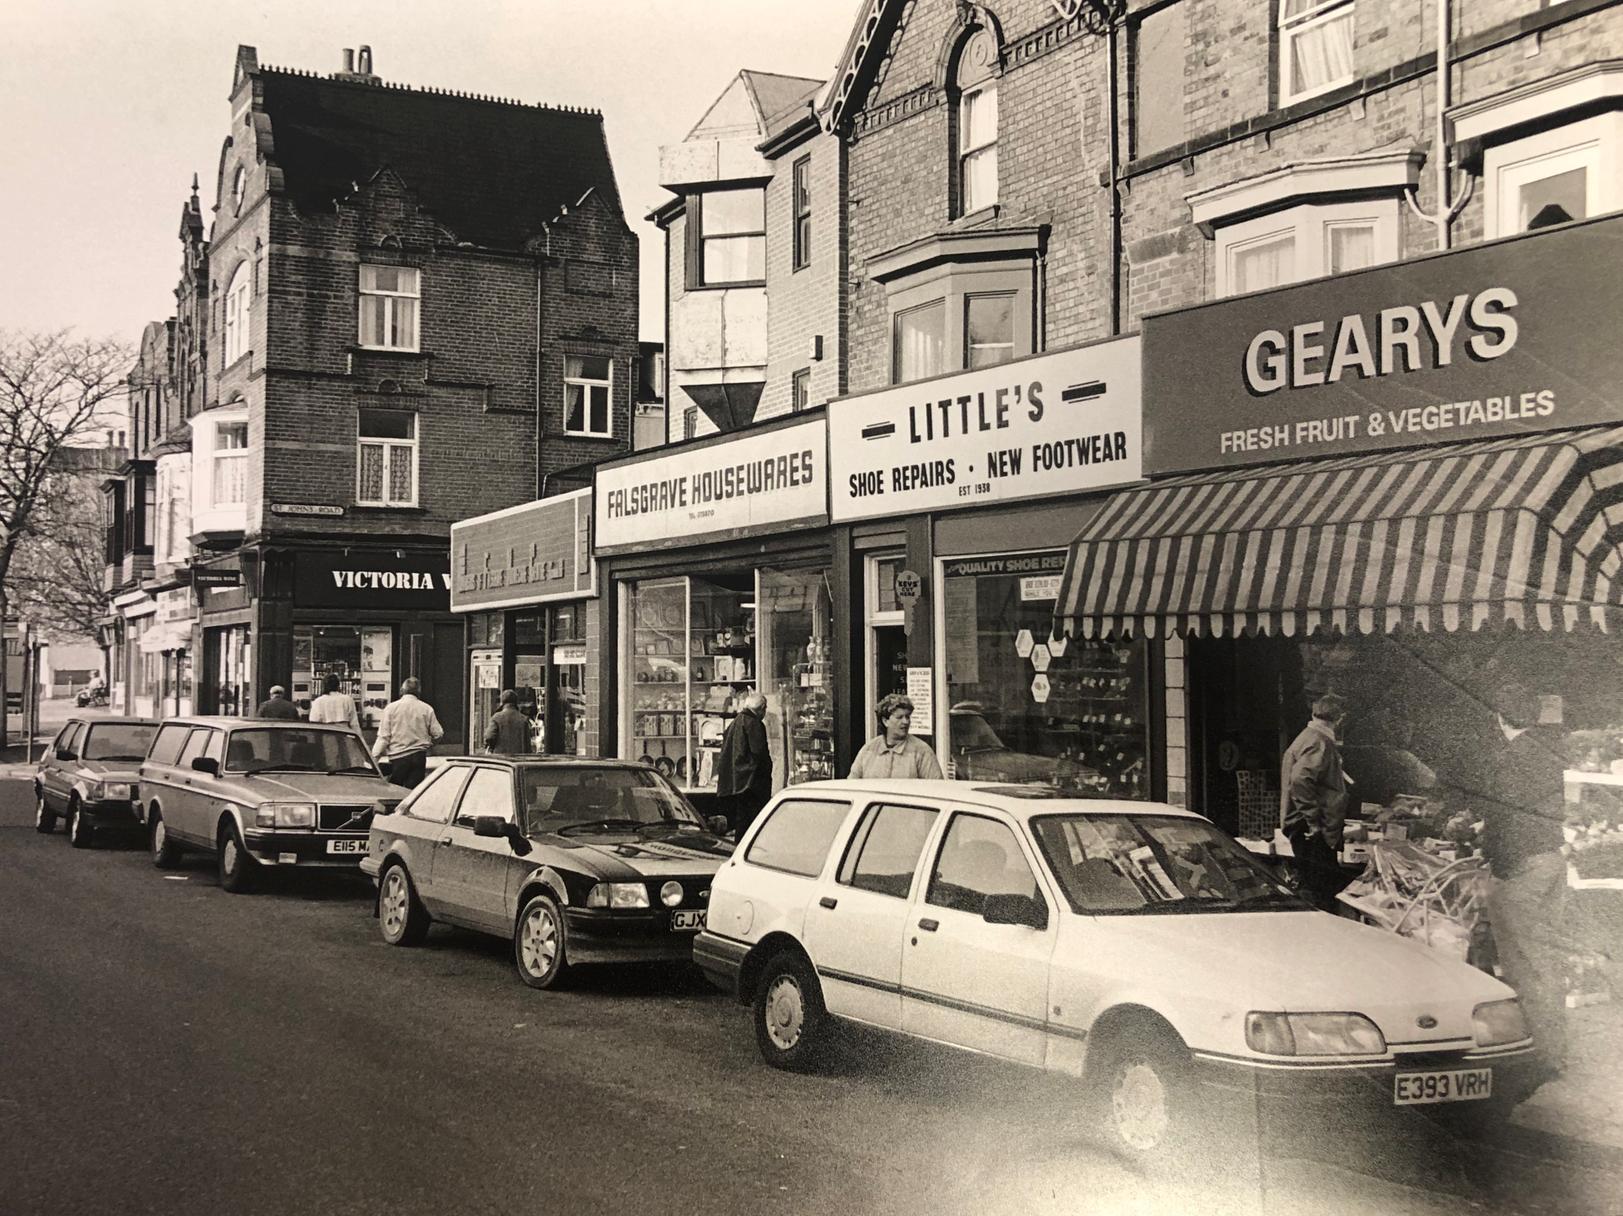 Though Pattison's fruit and veg is on the opposite side of the road, Gearys is no longer there, seen here in 1989. Centurion Windows are now on the corner, with Bargain Booze on the opposite side of St John's Road.